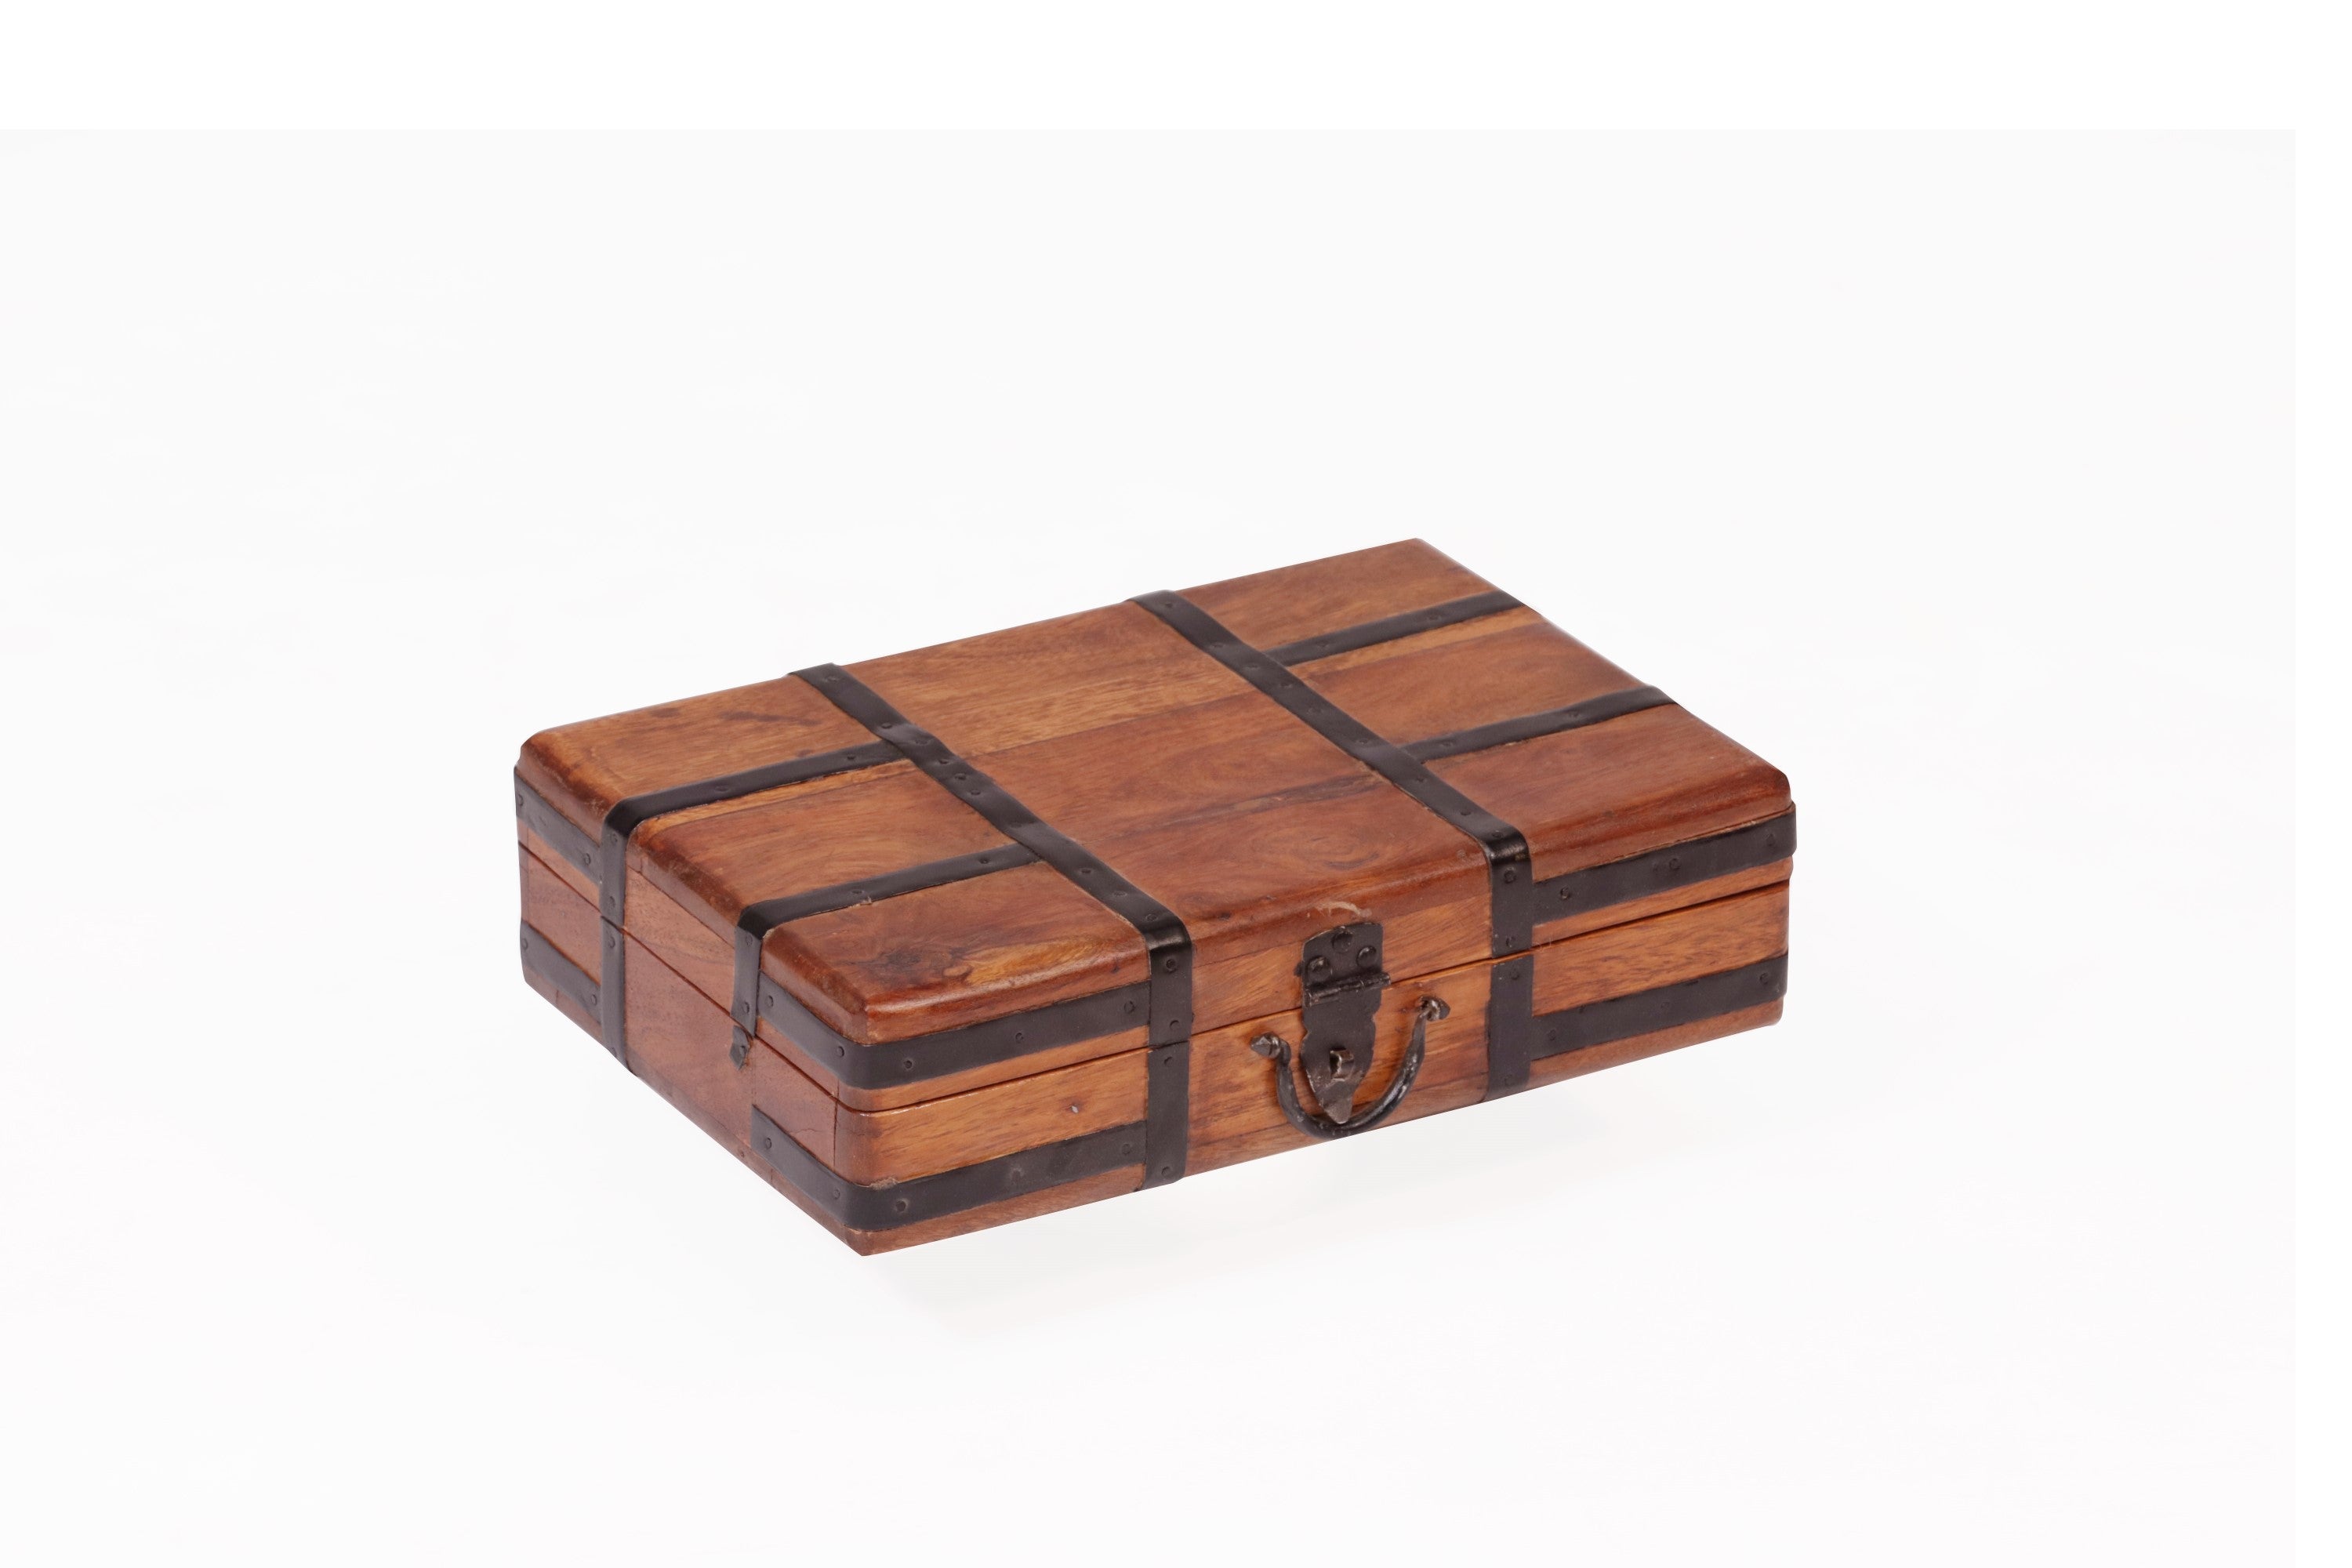 Metal Fitted Wooden Suitcase Small (11.5 x 7.5 x 3 Inch) Wooden Box